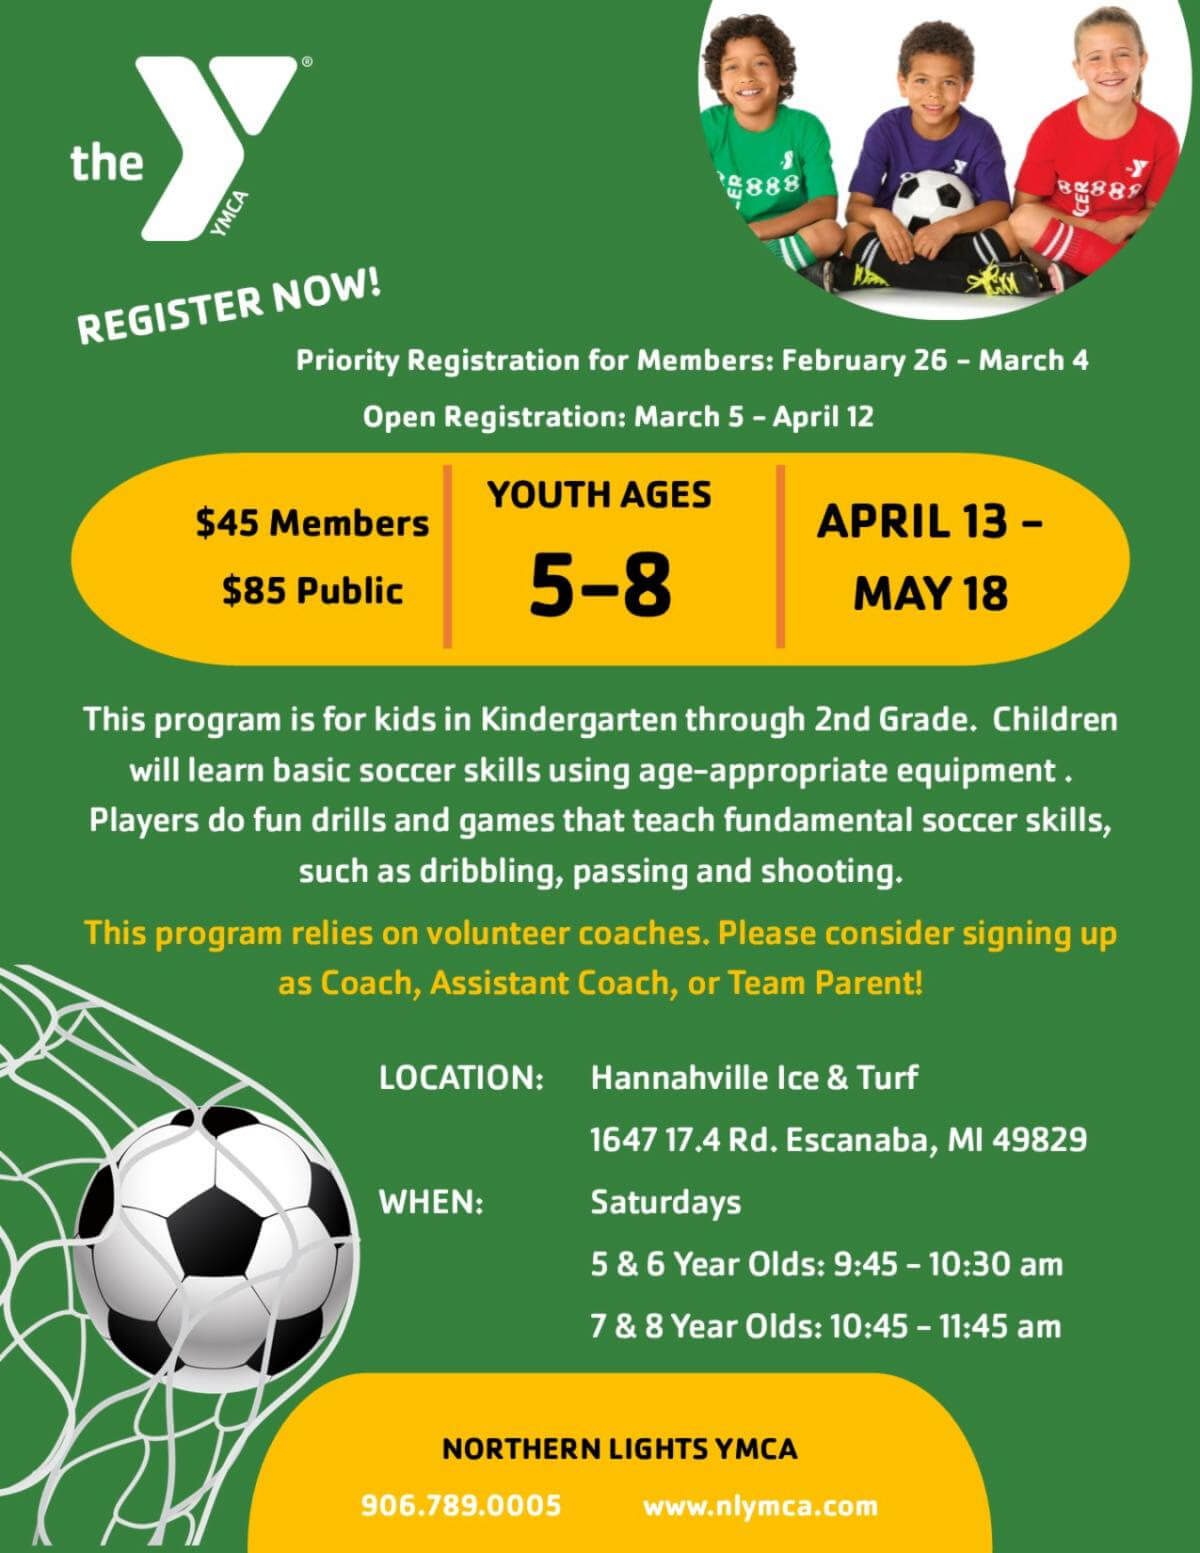 The Y Register Now! Priority Registration for Members: February 26-March 4; Open Registration: March 5 April 12; $45 Members/ $85 Public; Youth Ages 5-8; April 13- May 18. This program is for kids in Kindergarten through 2nd Grade. Children will learn basic soccer skills using age-appropriate equipment. Players do fun drills and games that teach fundamental soccer skills, such as dribbling, passing and shooting. This program relies on volunteer coaches. Please consider signing up as Coach, Assistance Coach, or Team Parent! Location: Hannahville Ice & Turf, 1647 17.4 Rd., Escanaba, Mi 49829; WHEN: Saturdays 5 & 6 Year Olds: 9:45 - 10:30, 7 & 8 Year Olds: 10:45 - 11:45; Northern Lights YMCA, 906-789-0005, www.nlymca.com